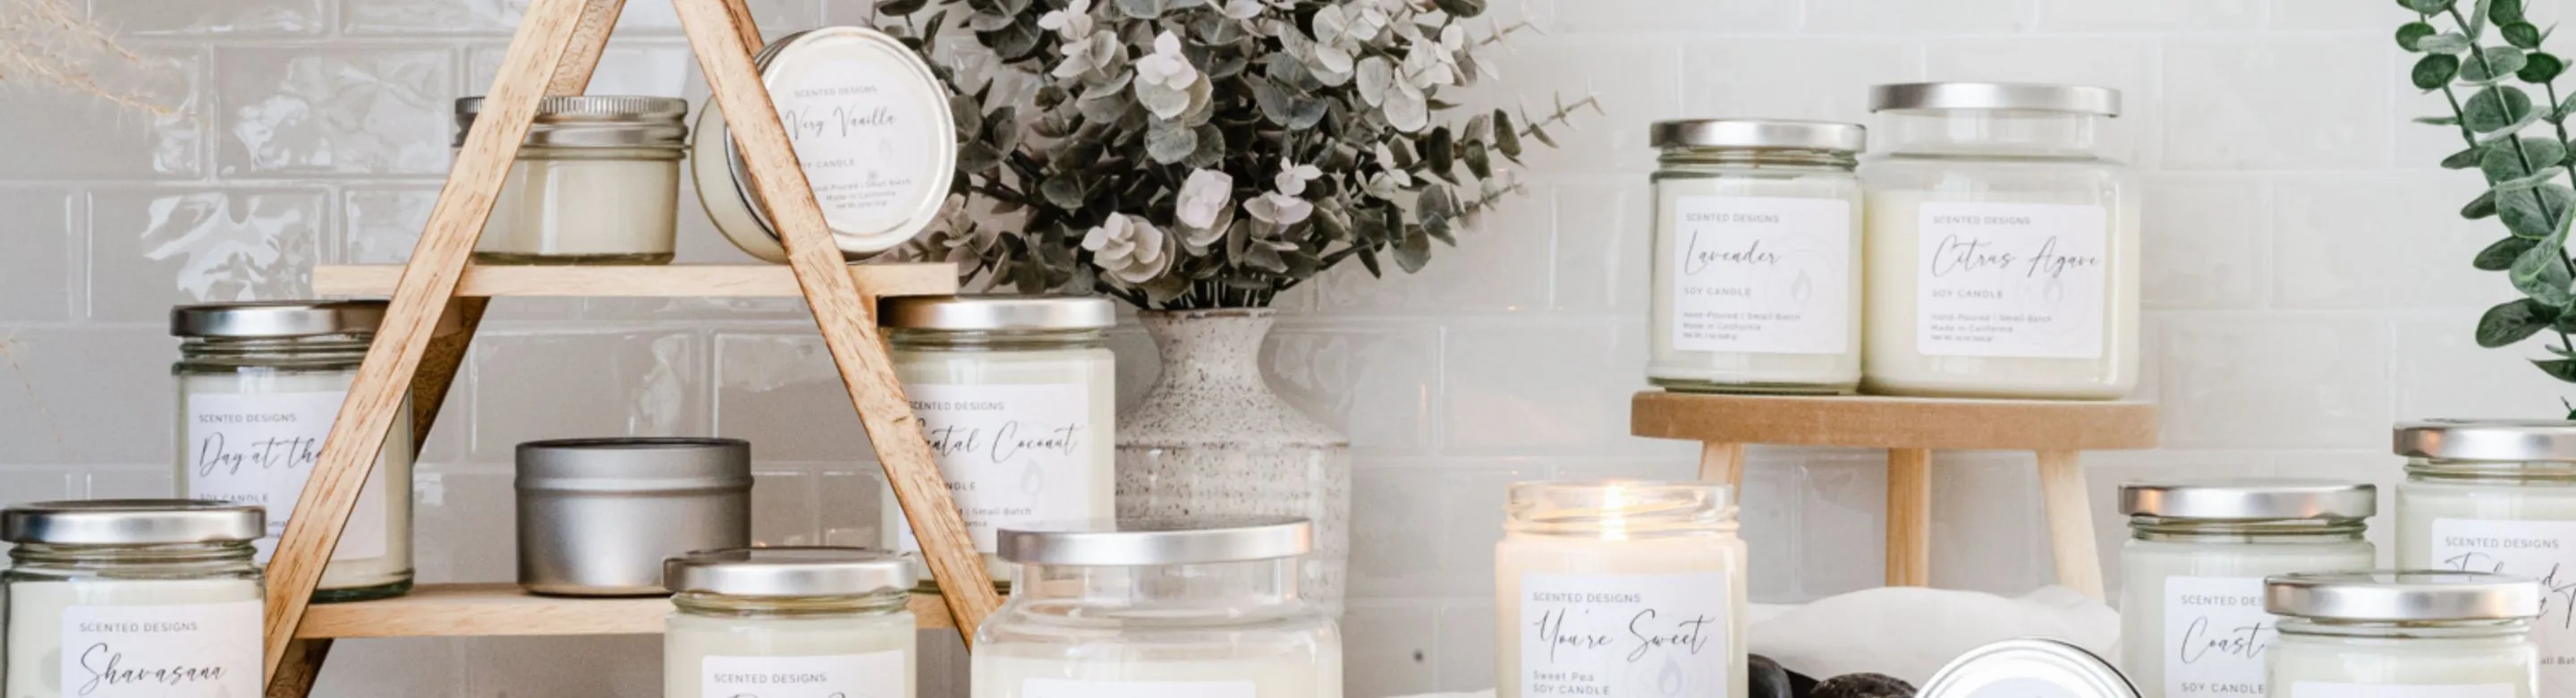 Scented Designs Candles